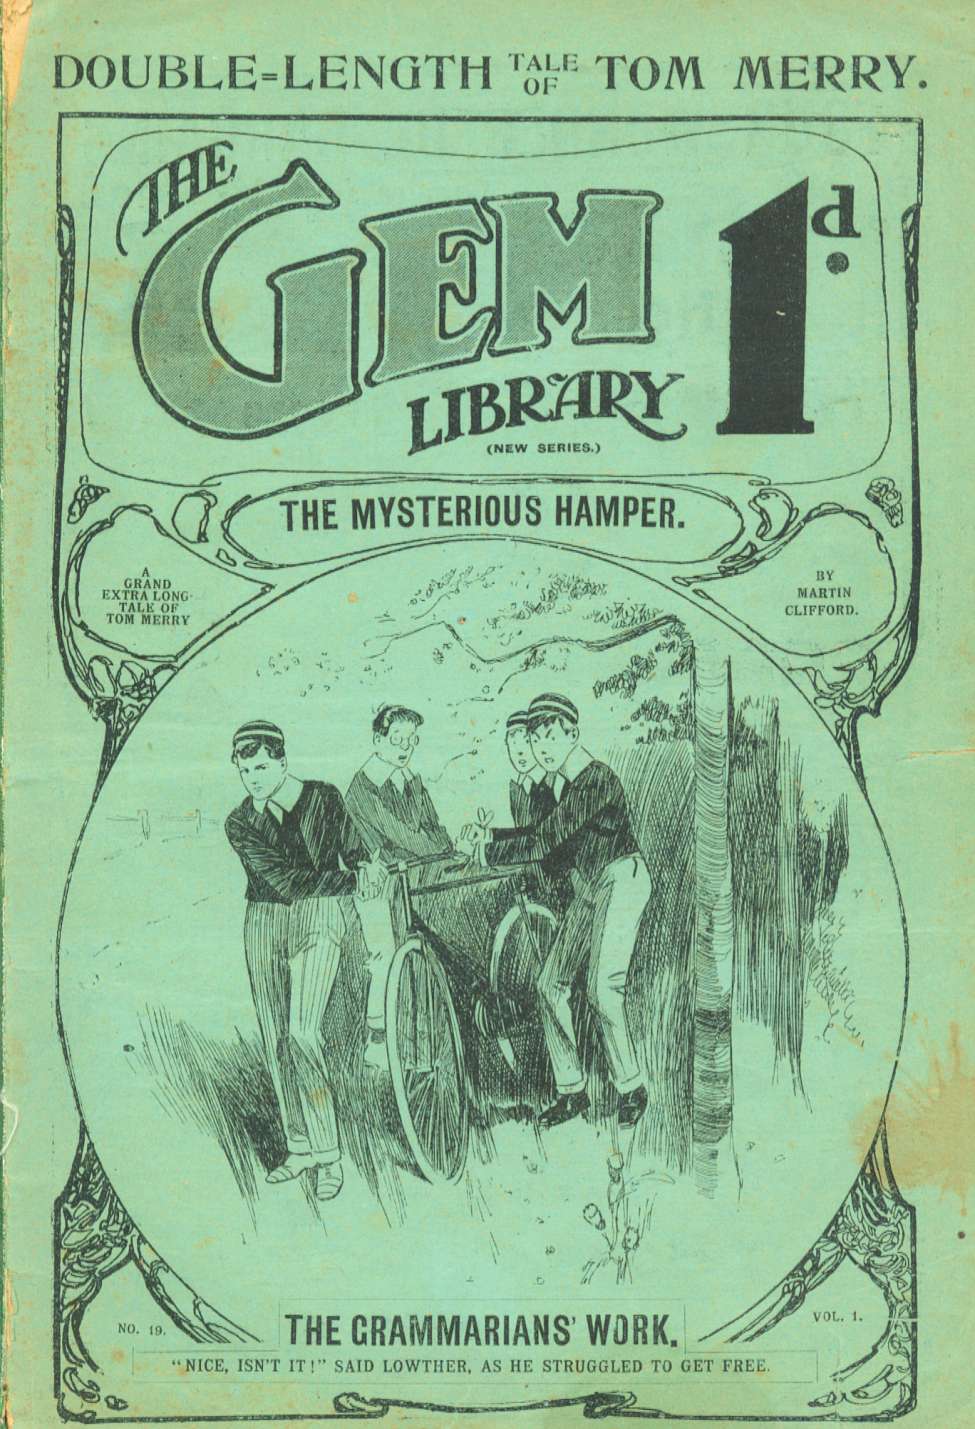 Book Cover For The Gem v2 19 - The Mysterious Hamper